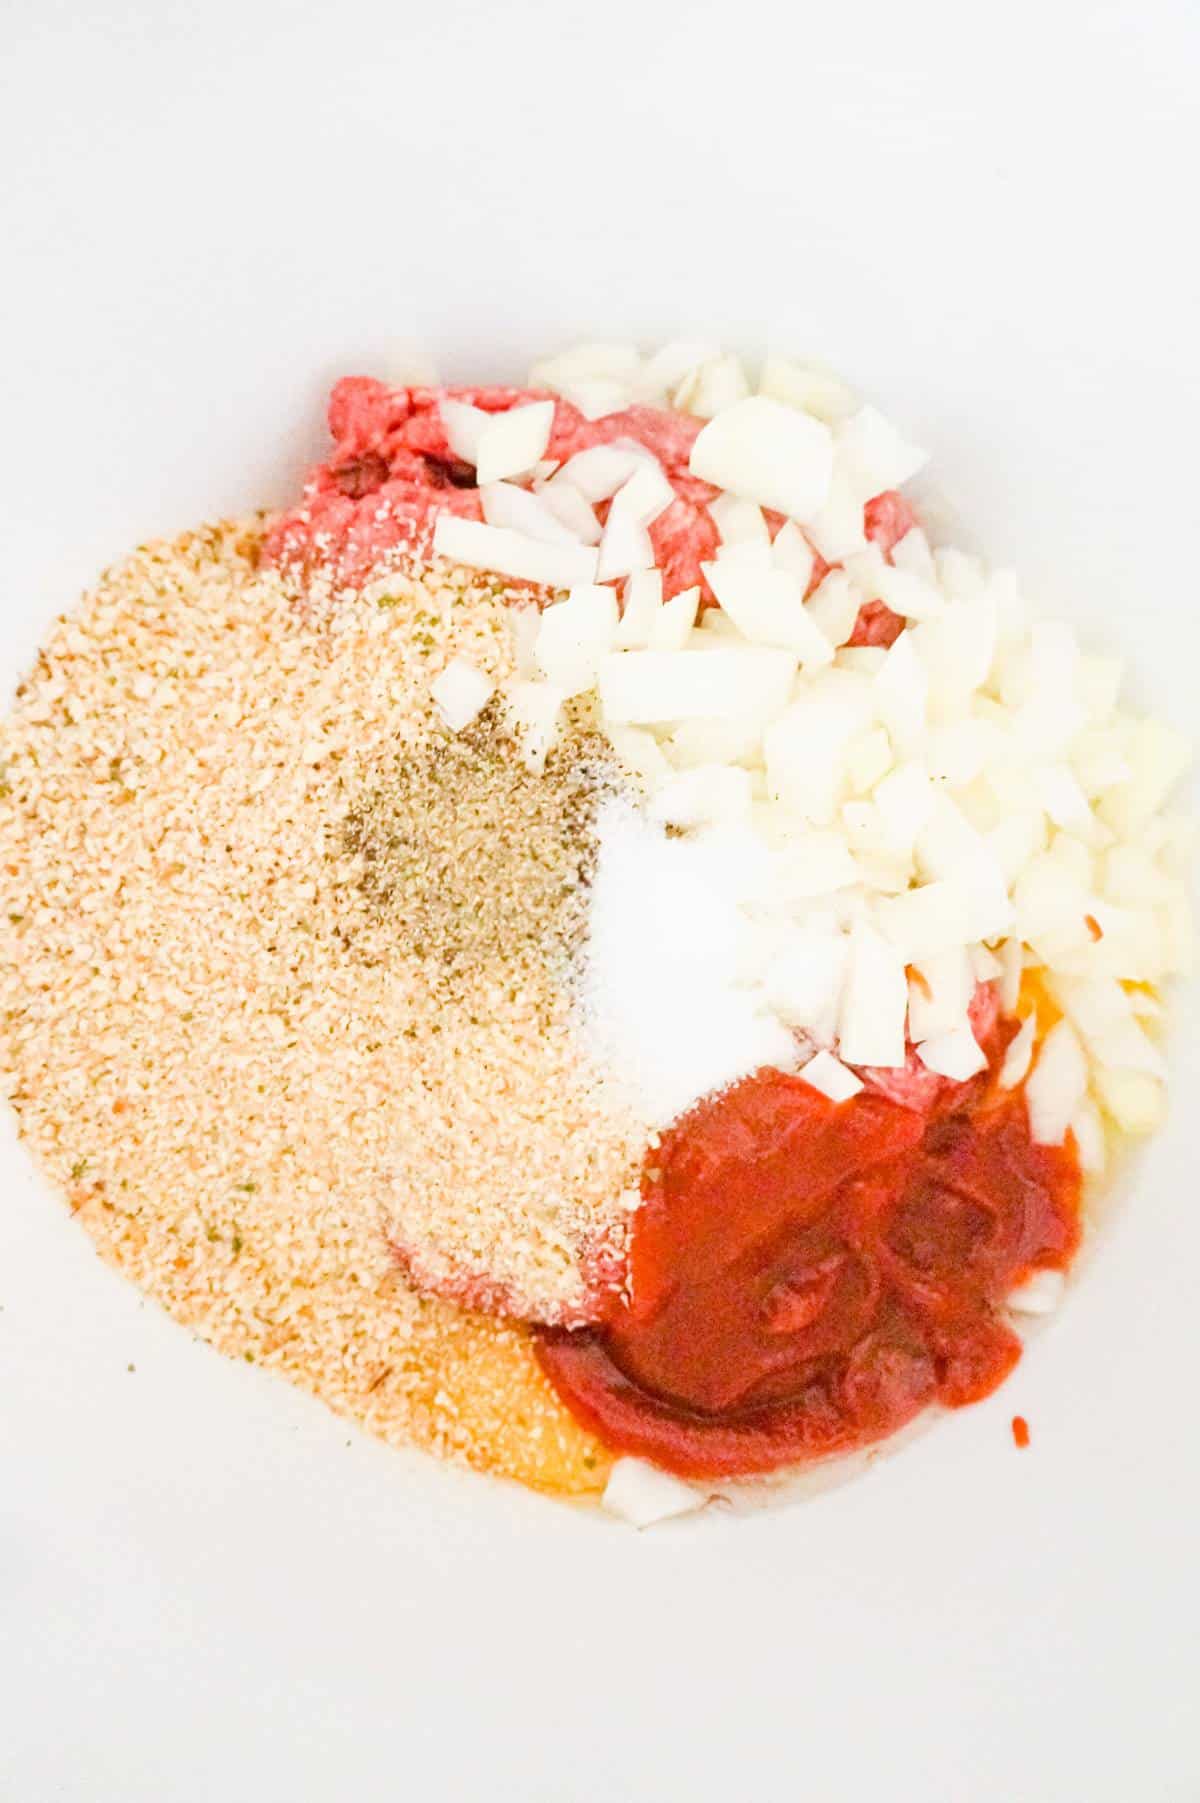 ketchup, diced onions and bread crumbs on top of ground beef in a mixing bowl